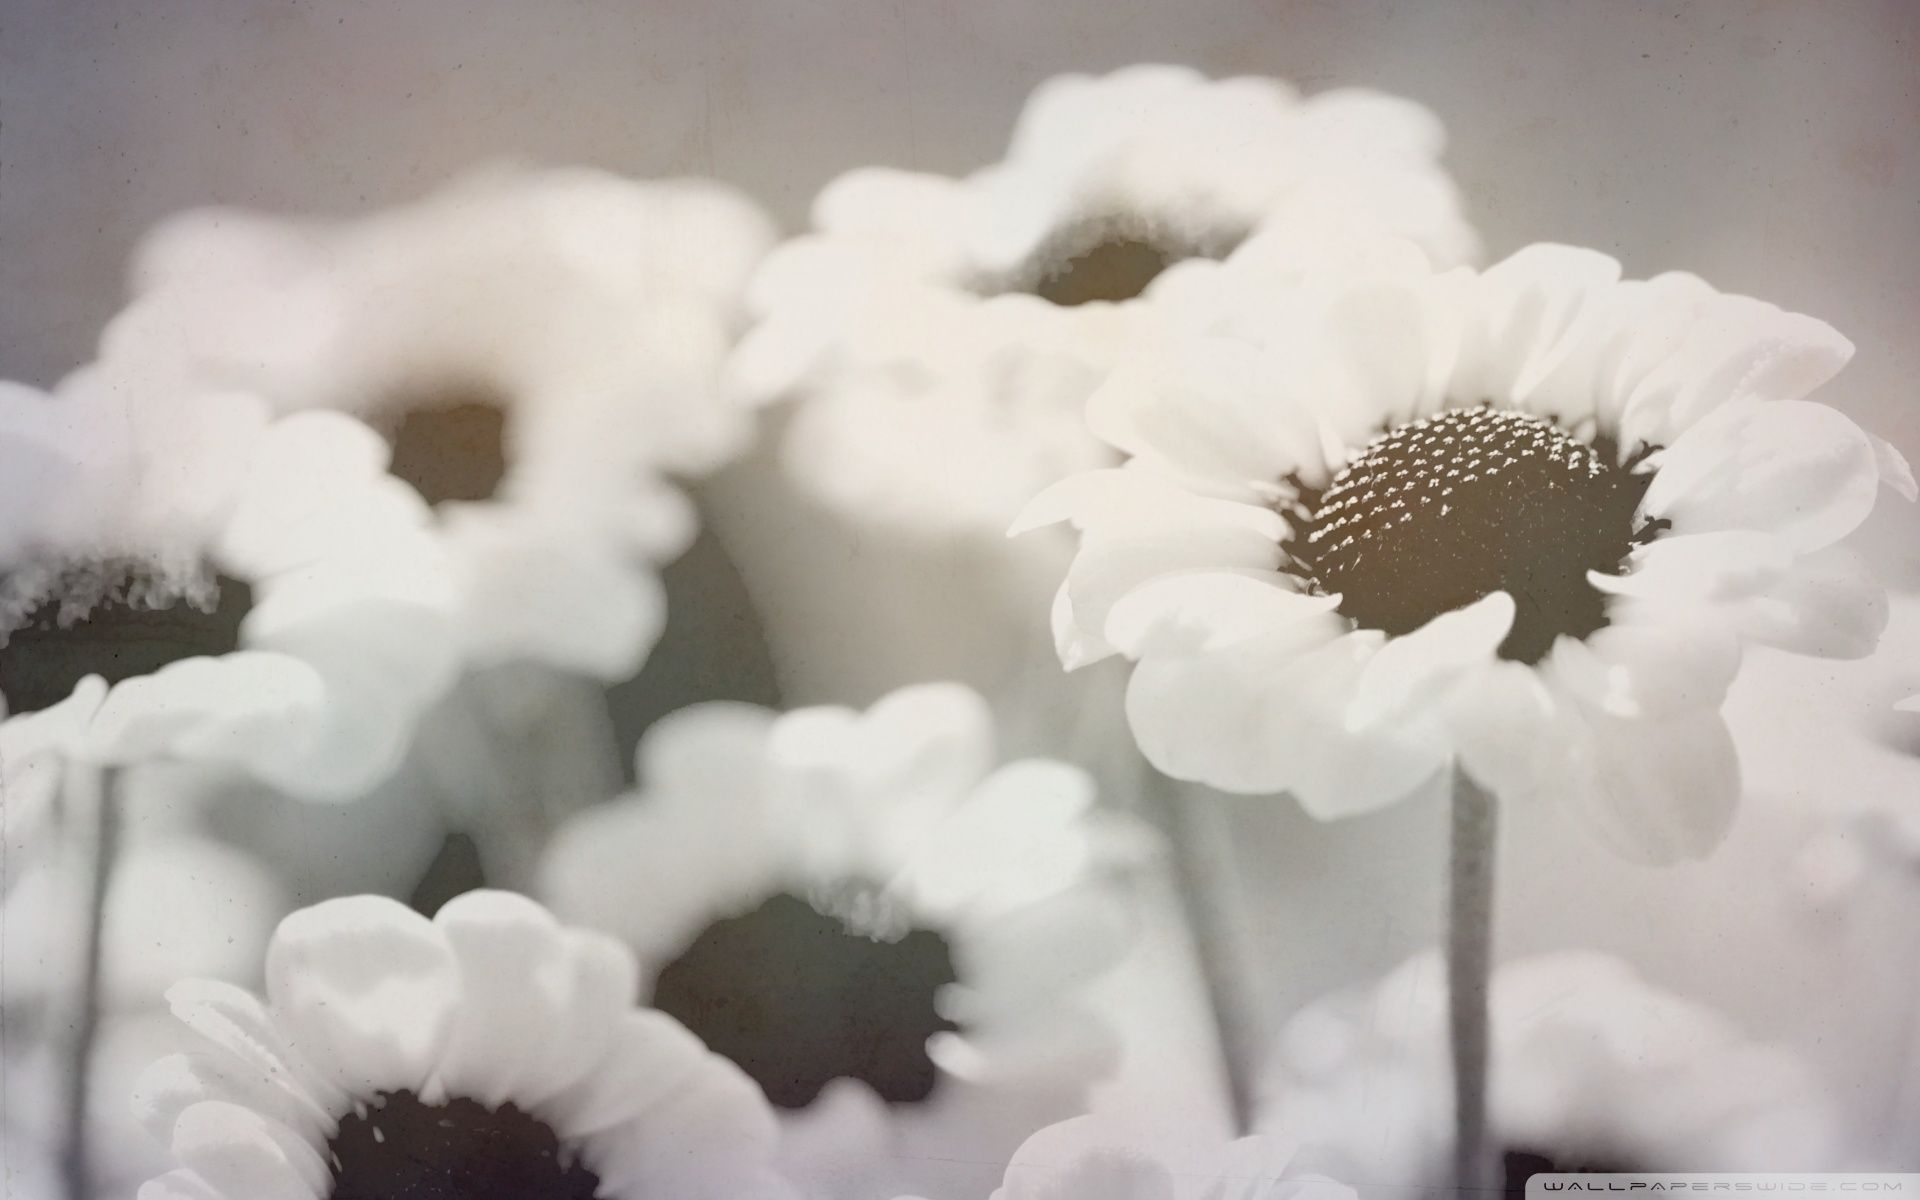 A close up of a group of white flowers - 1920x1200, daisy